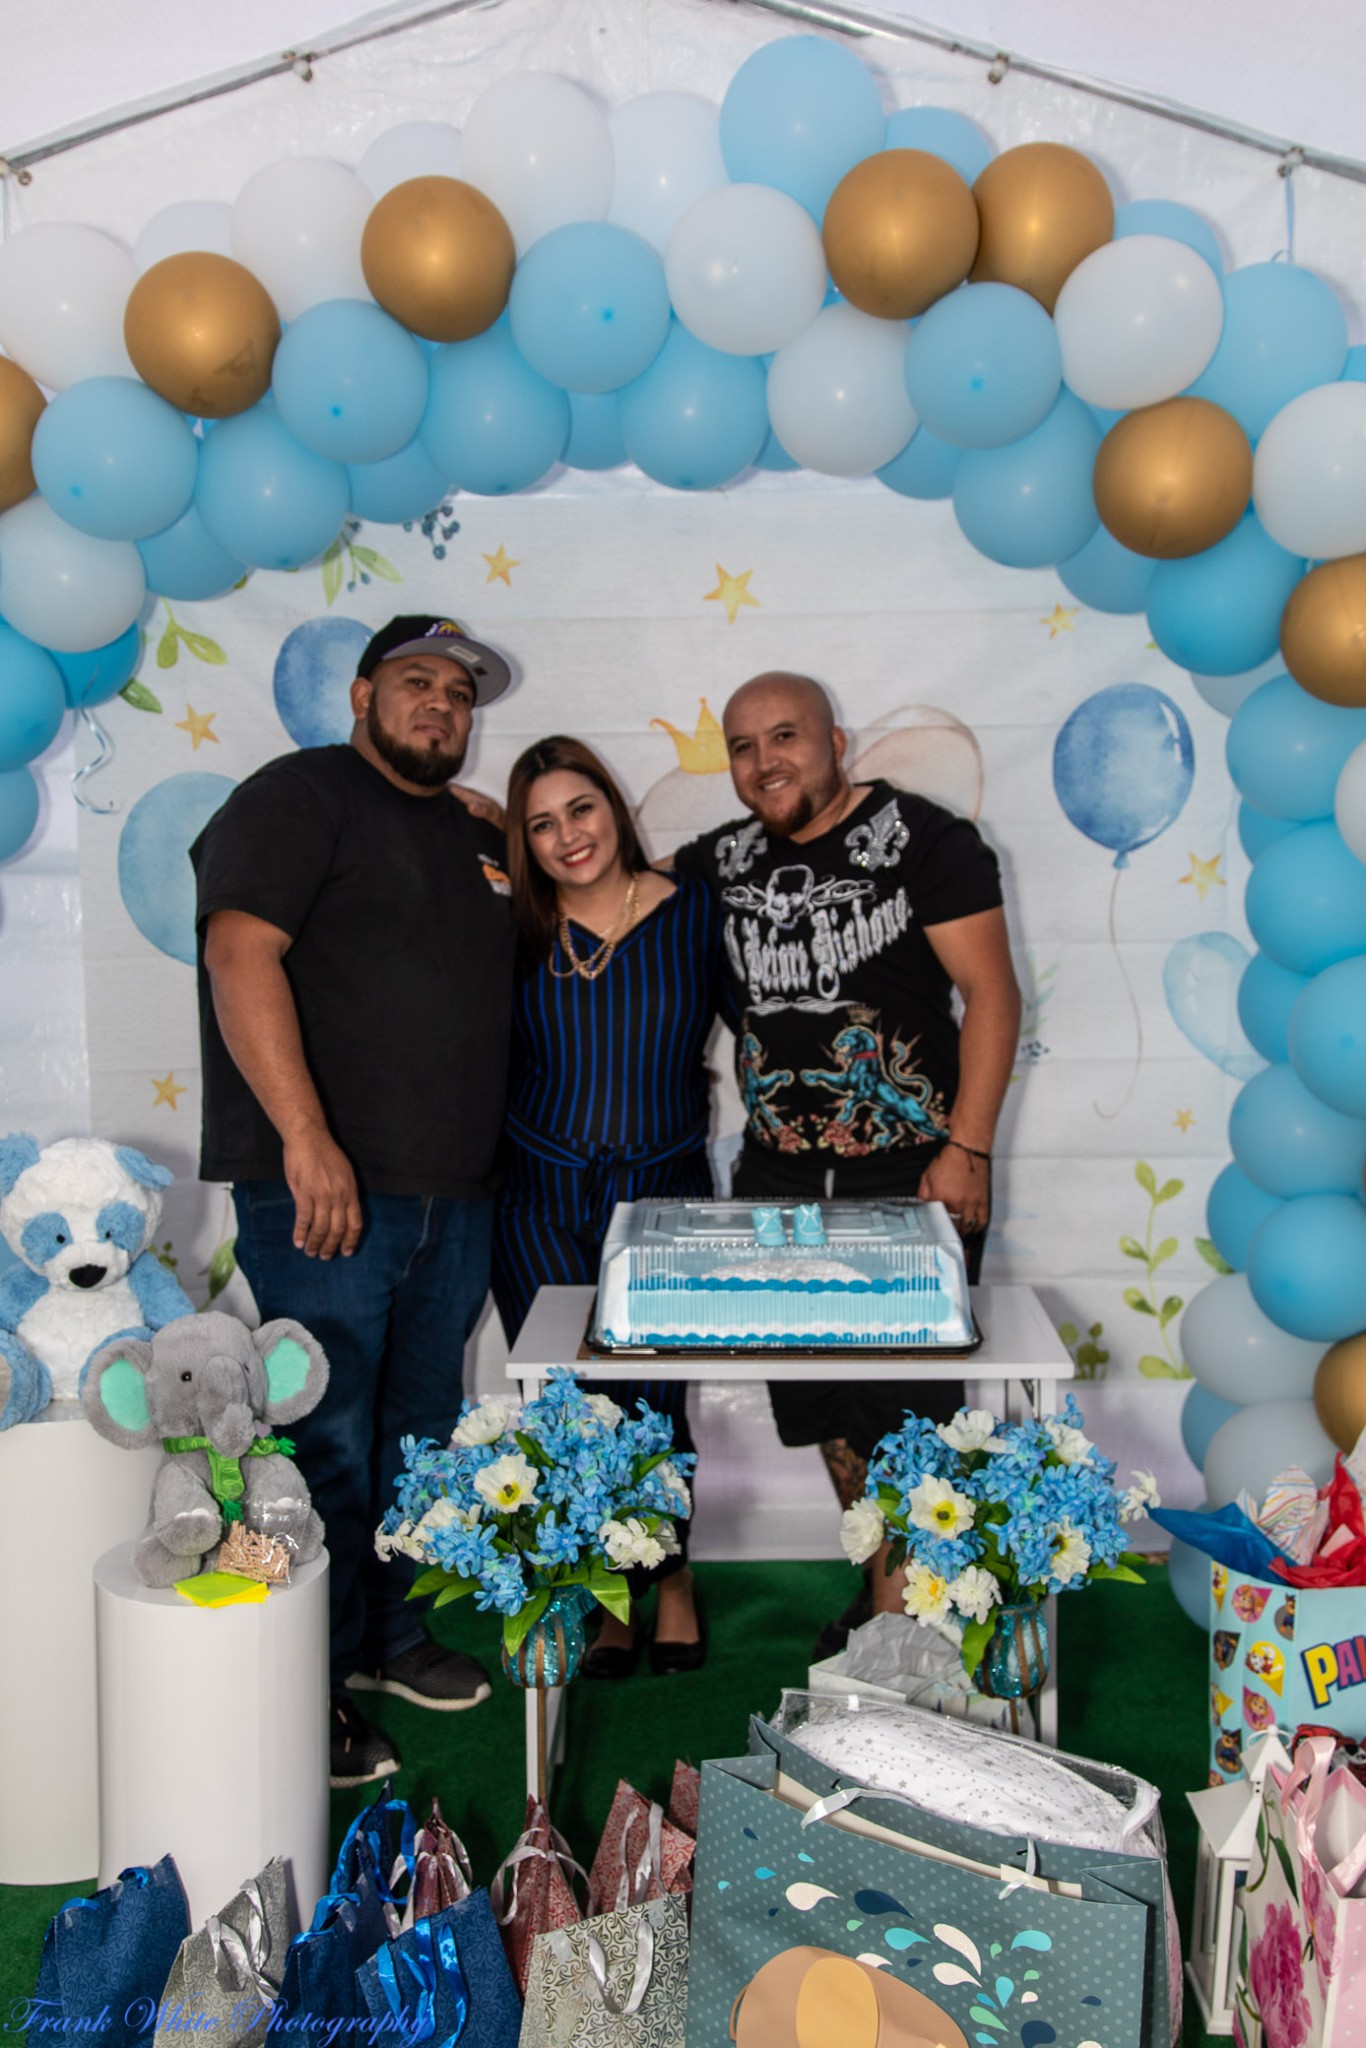 Christian-Baby-Shower-and-Family-Event-7.jpg